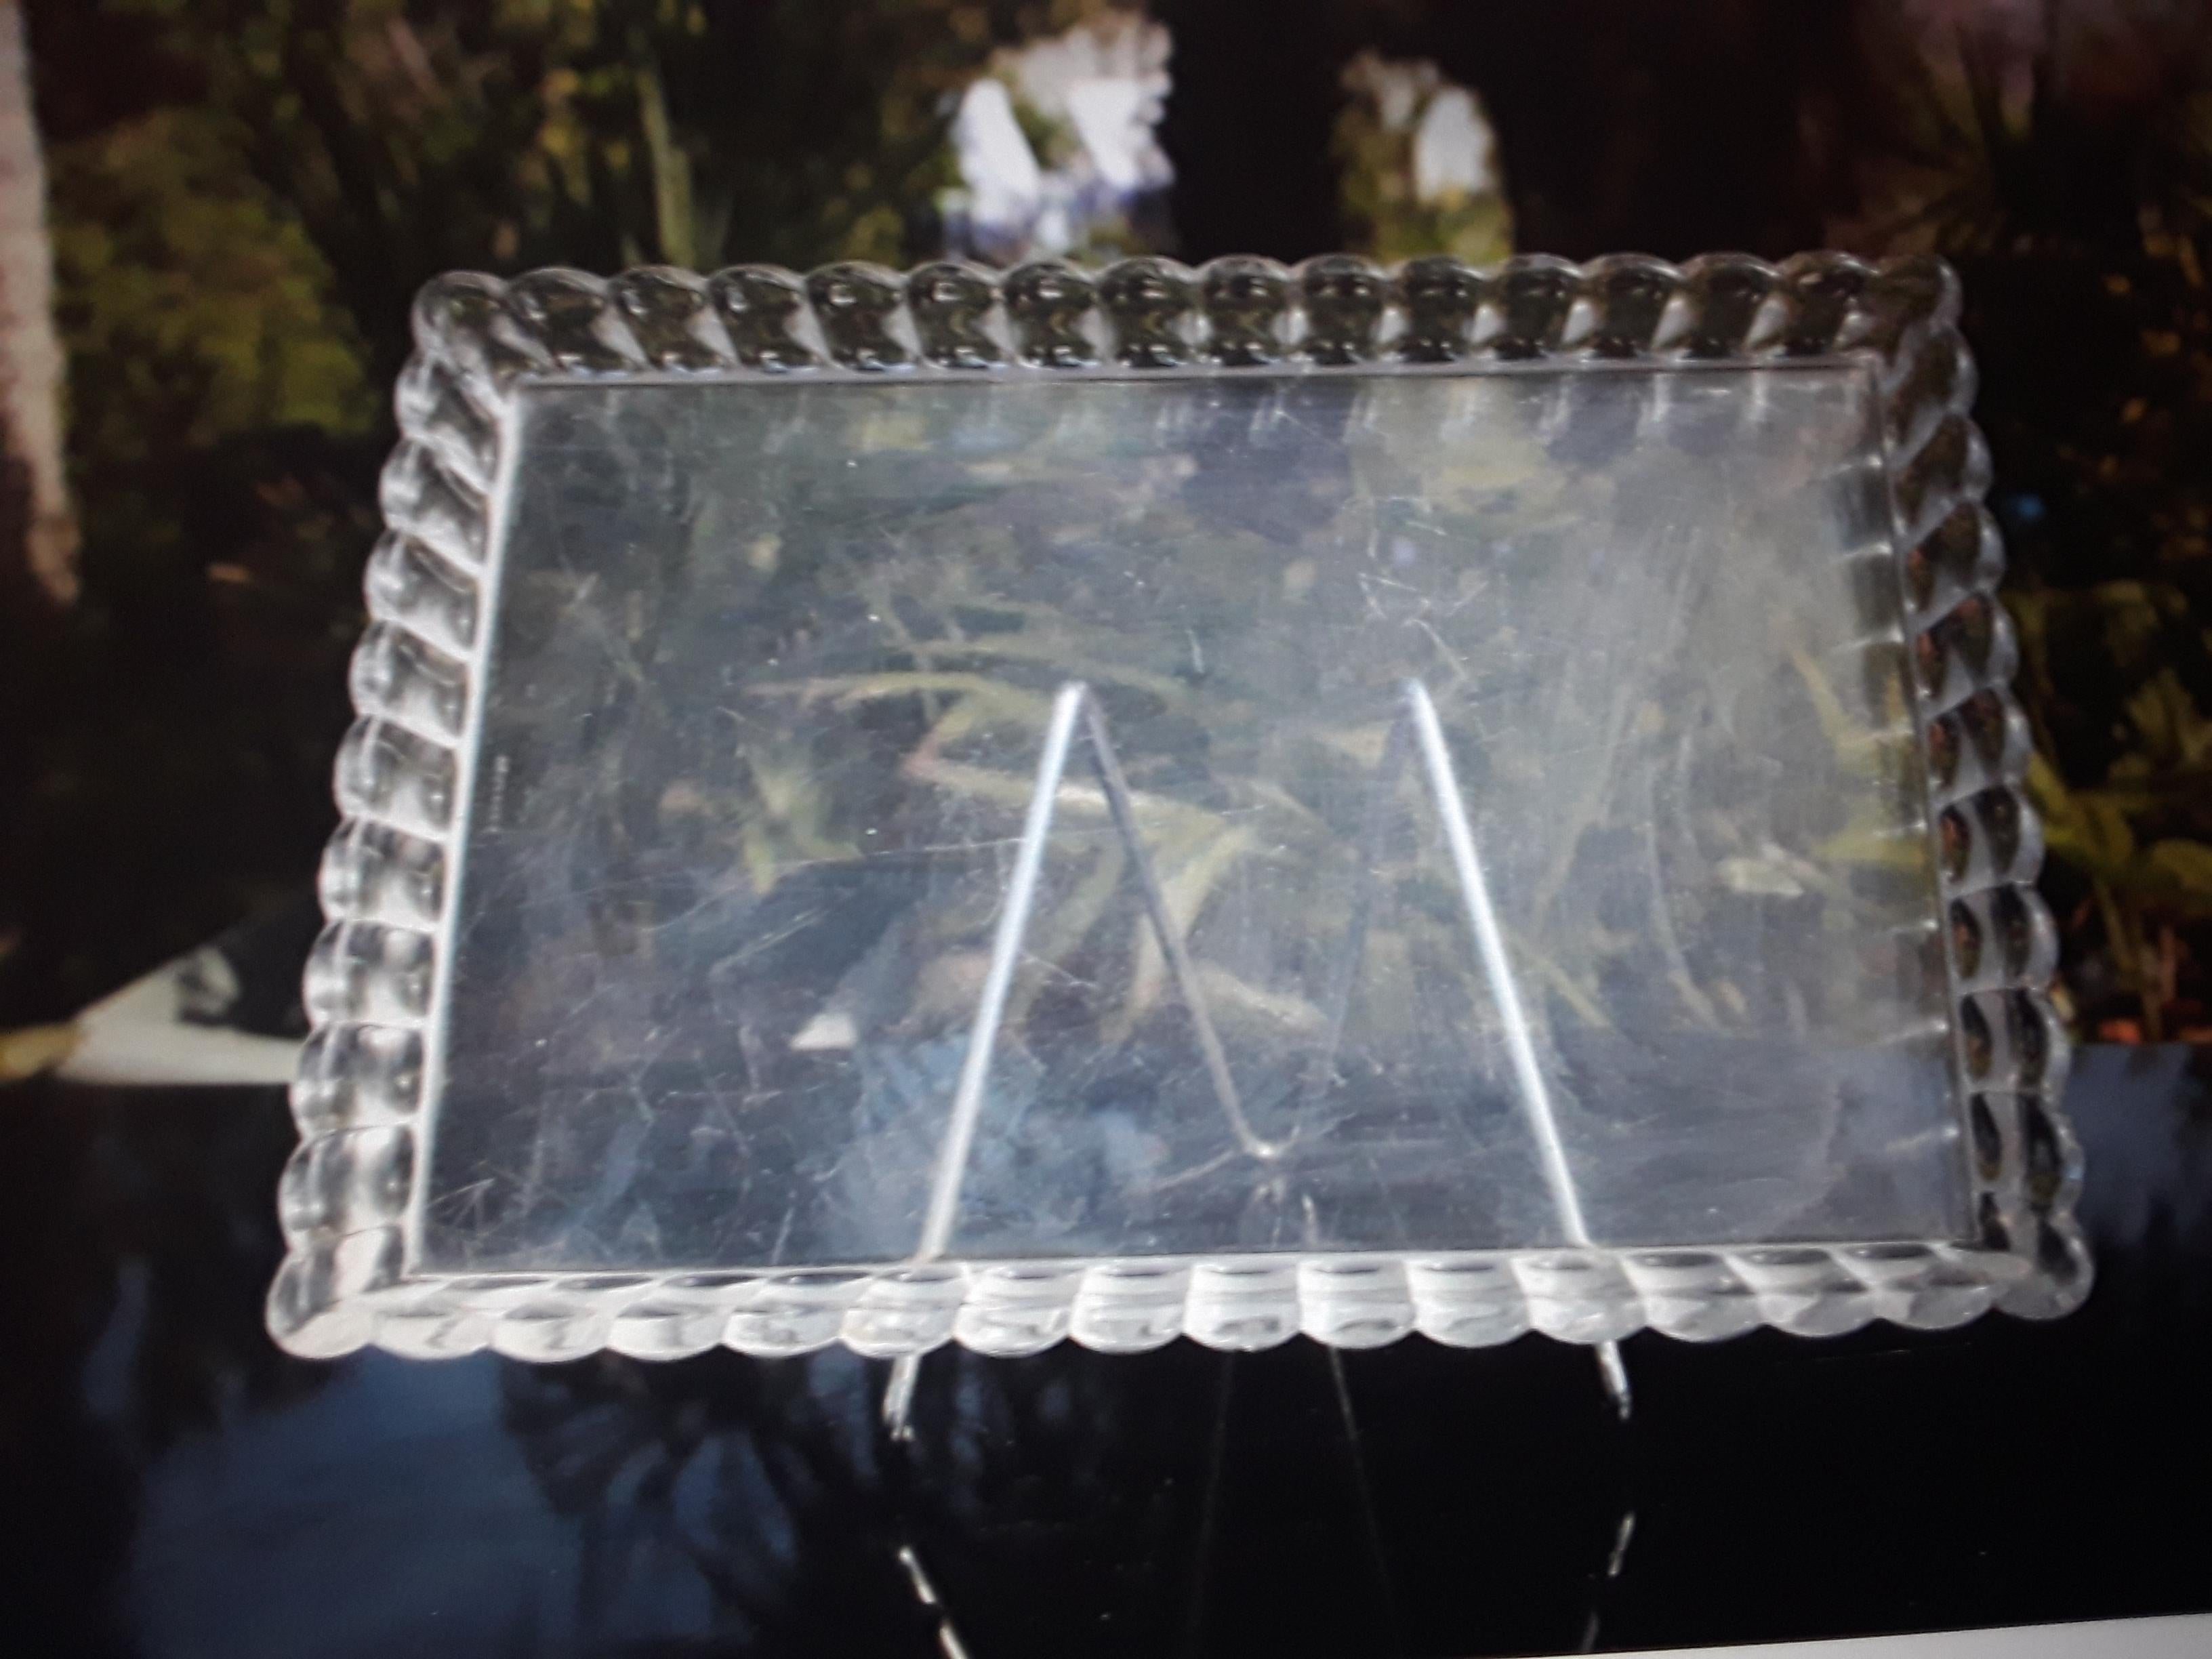 19thc French Signed Baccarat Crystal Presentation Serving Tray/ Platter. Rare piece by Baccarat.